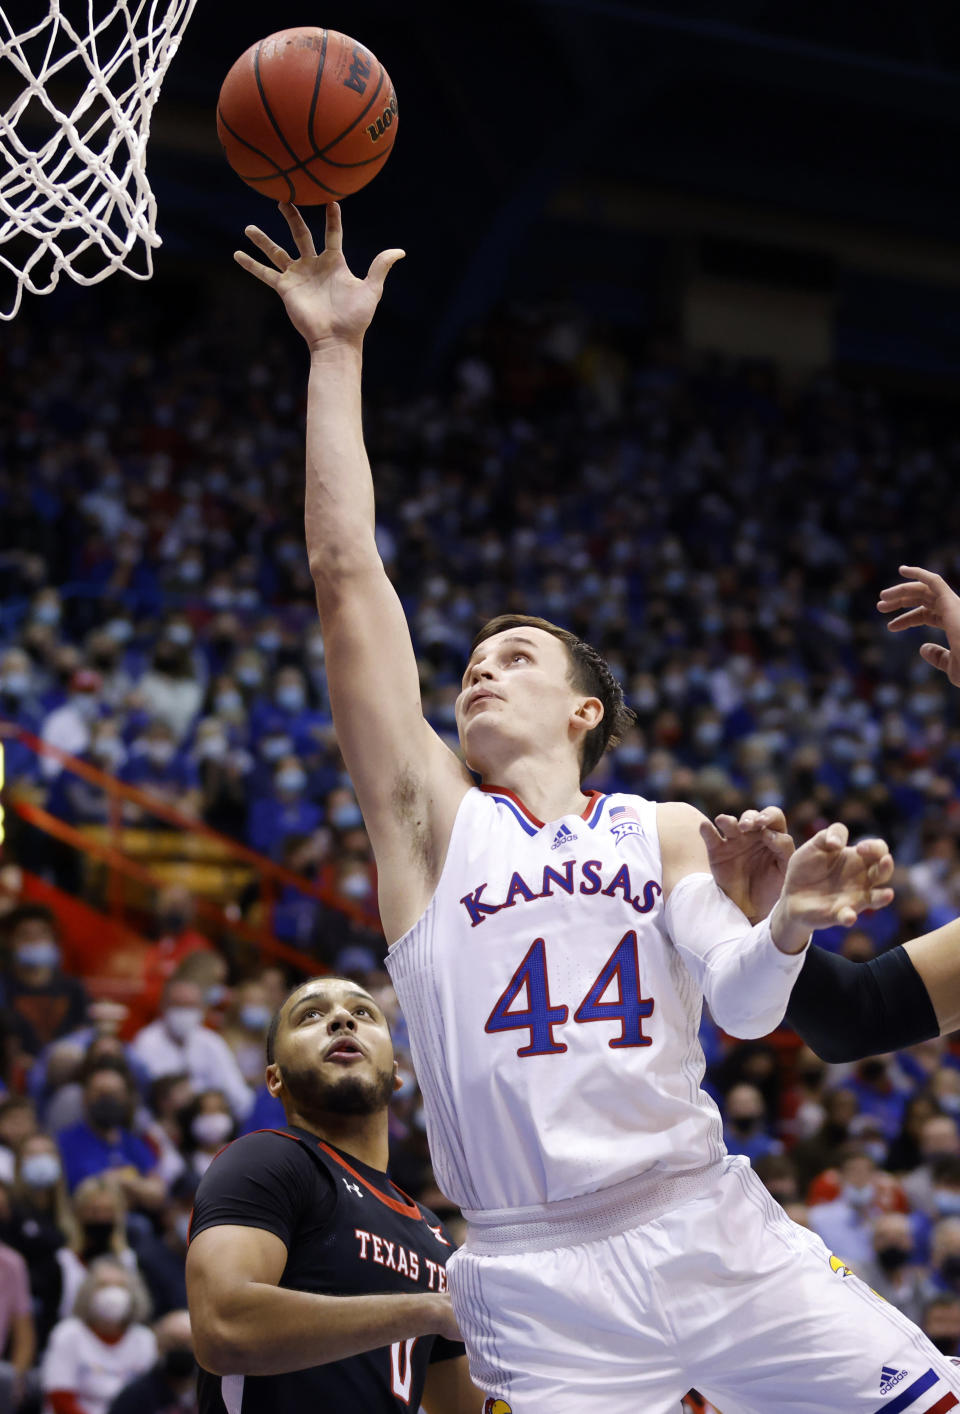 Kansas forward Mitch Lightfoot (44) scores against Texas Tech forward Kevin Obanor (0) during the first half of an NCAA college basketball game on Monday, Jan. 24, 2022 in Lawrence, Kan. (AP Photo/Colin E. Braley)